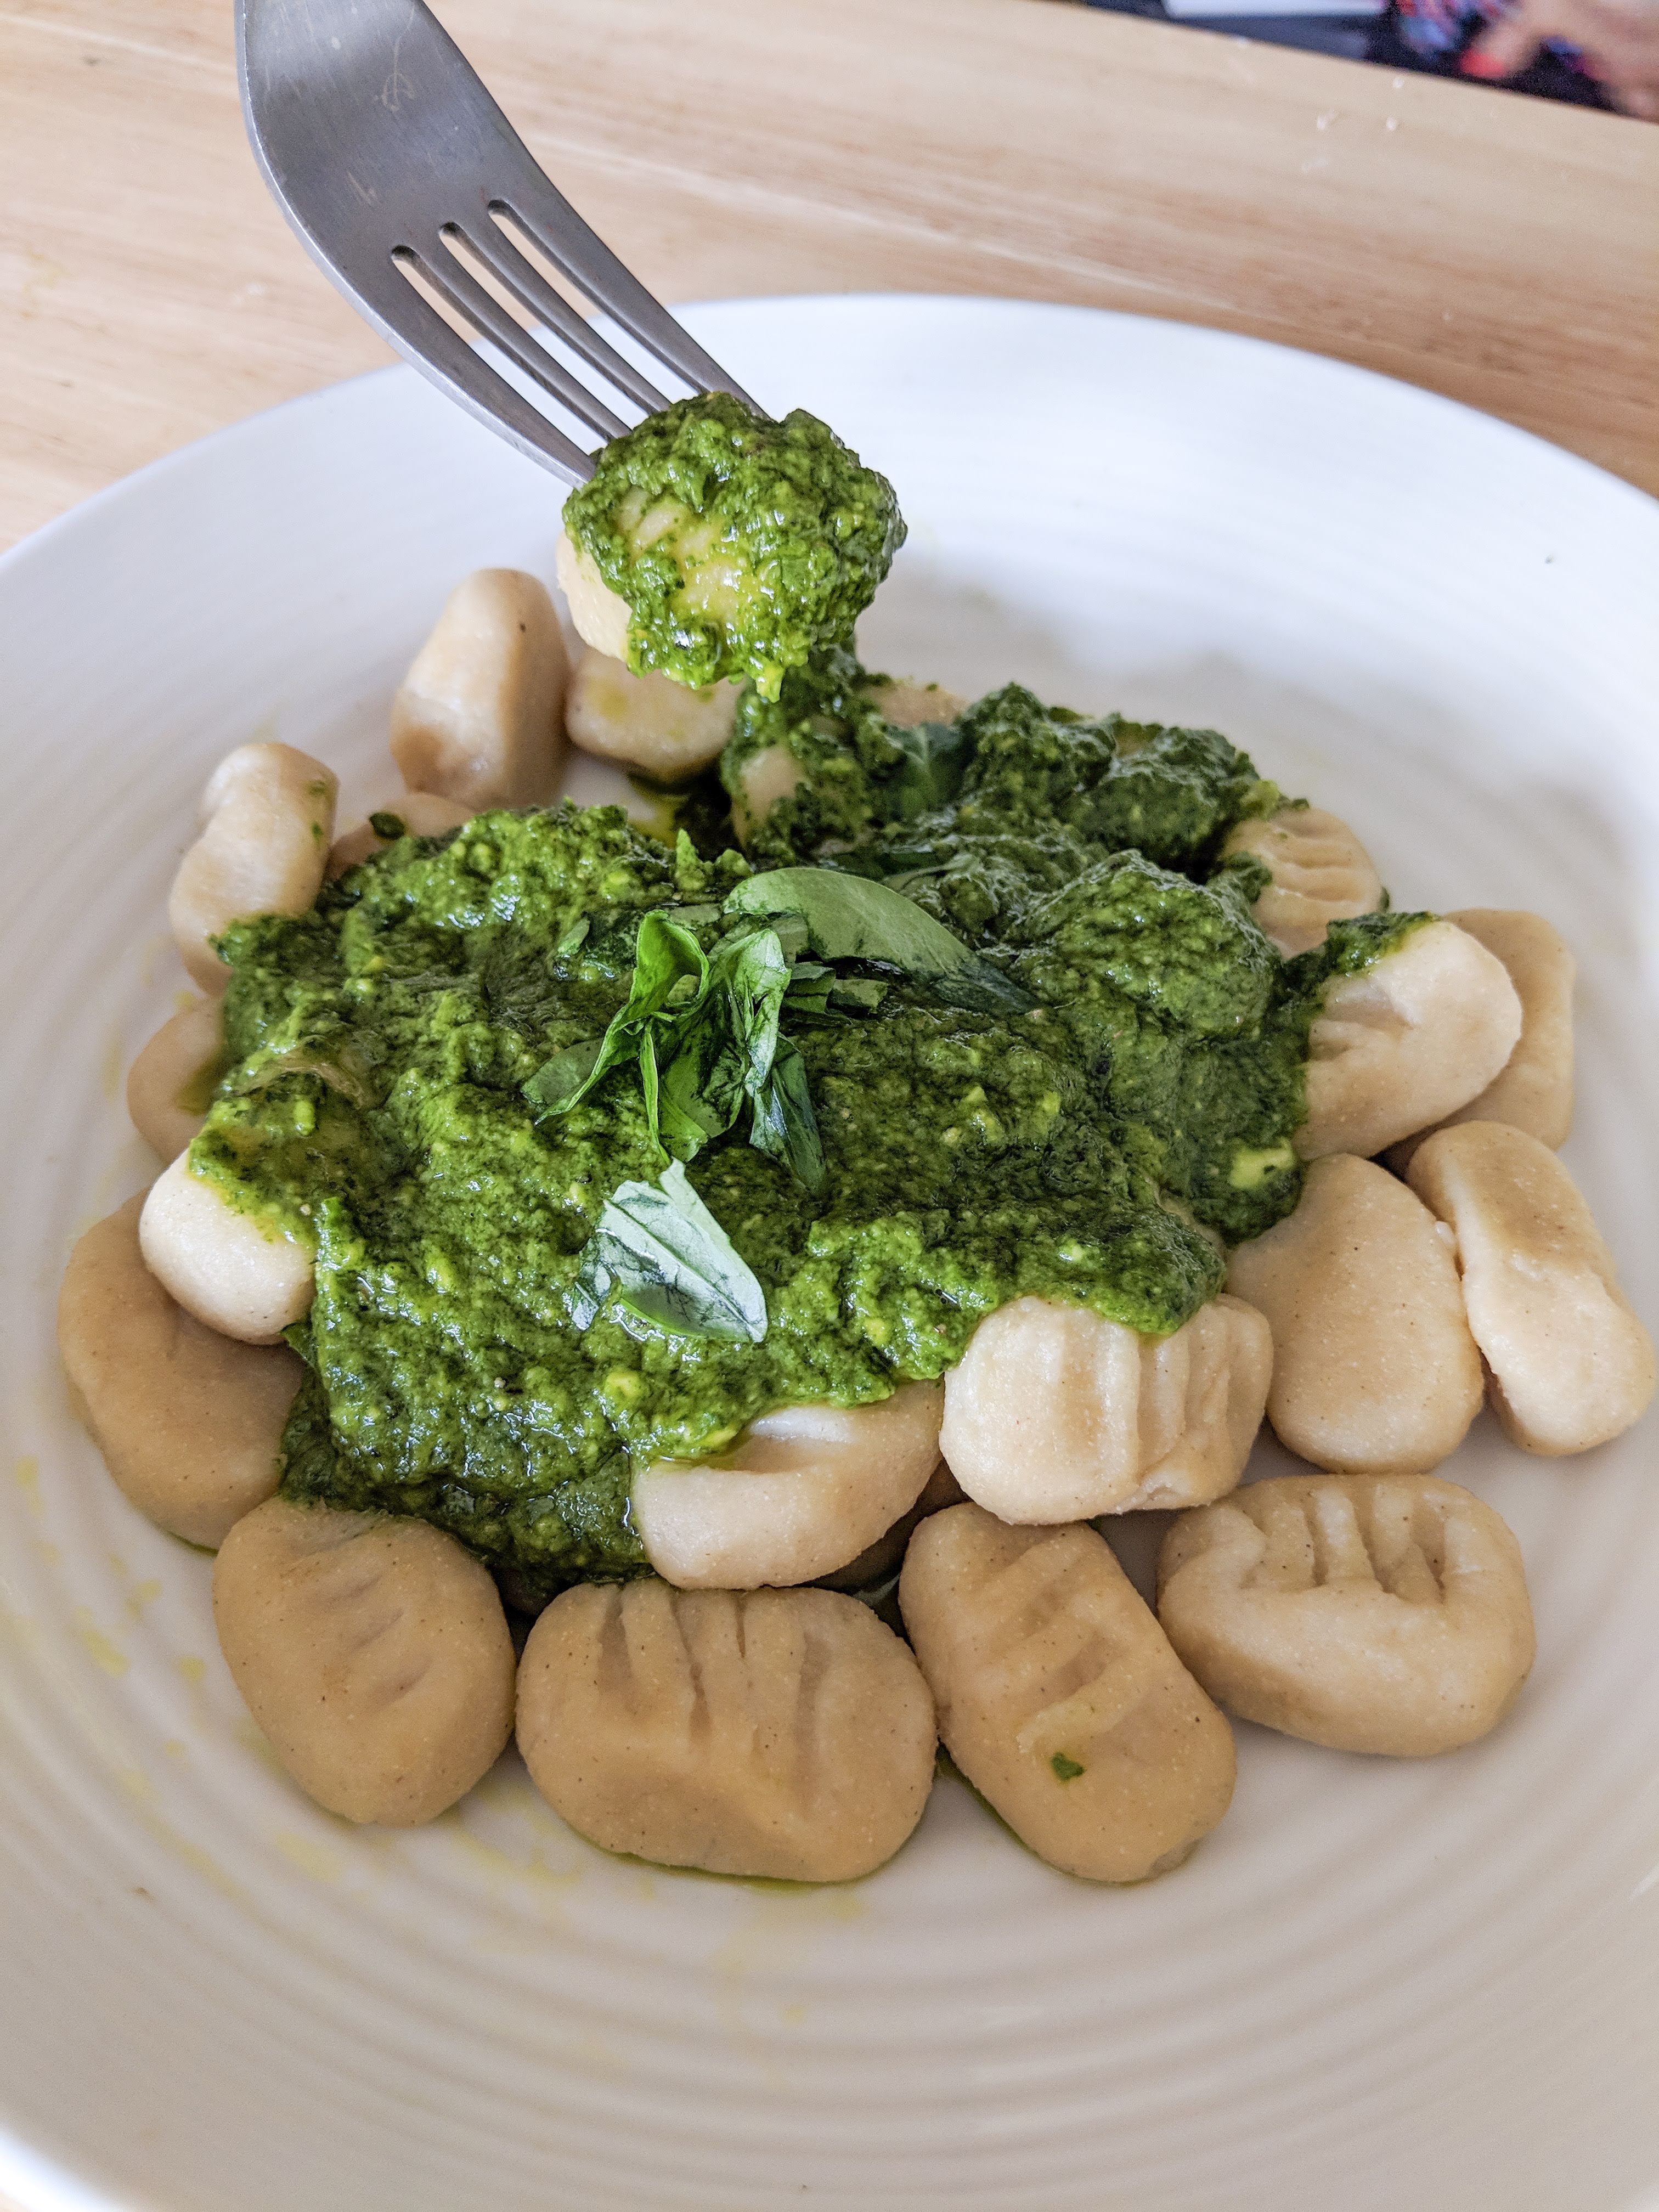 A plate full of cauliflower gnocchi with avocado spinach pesto on top